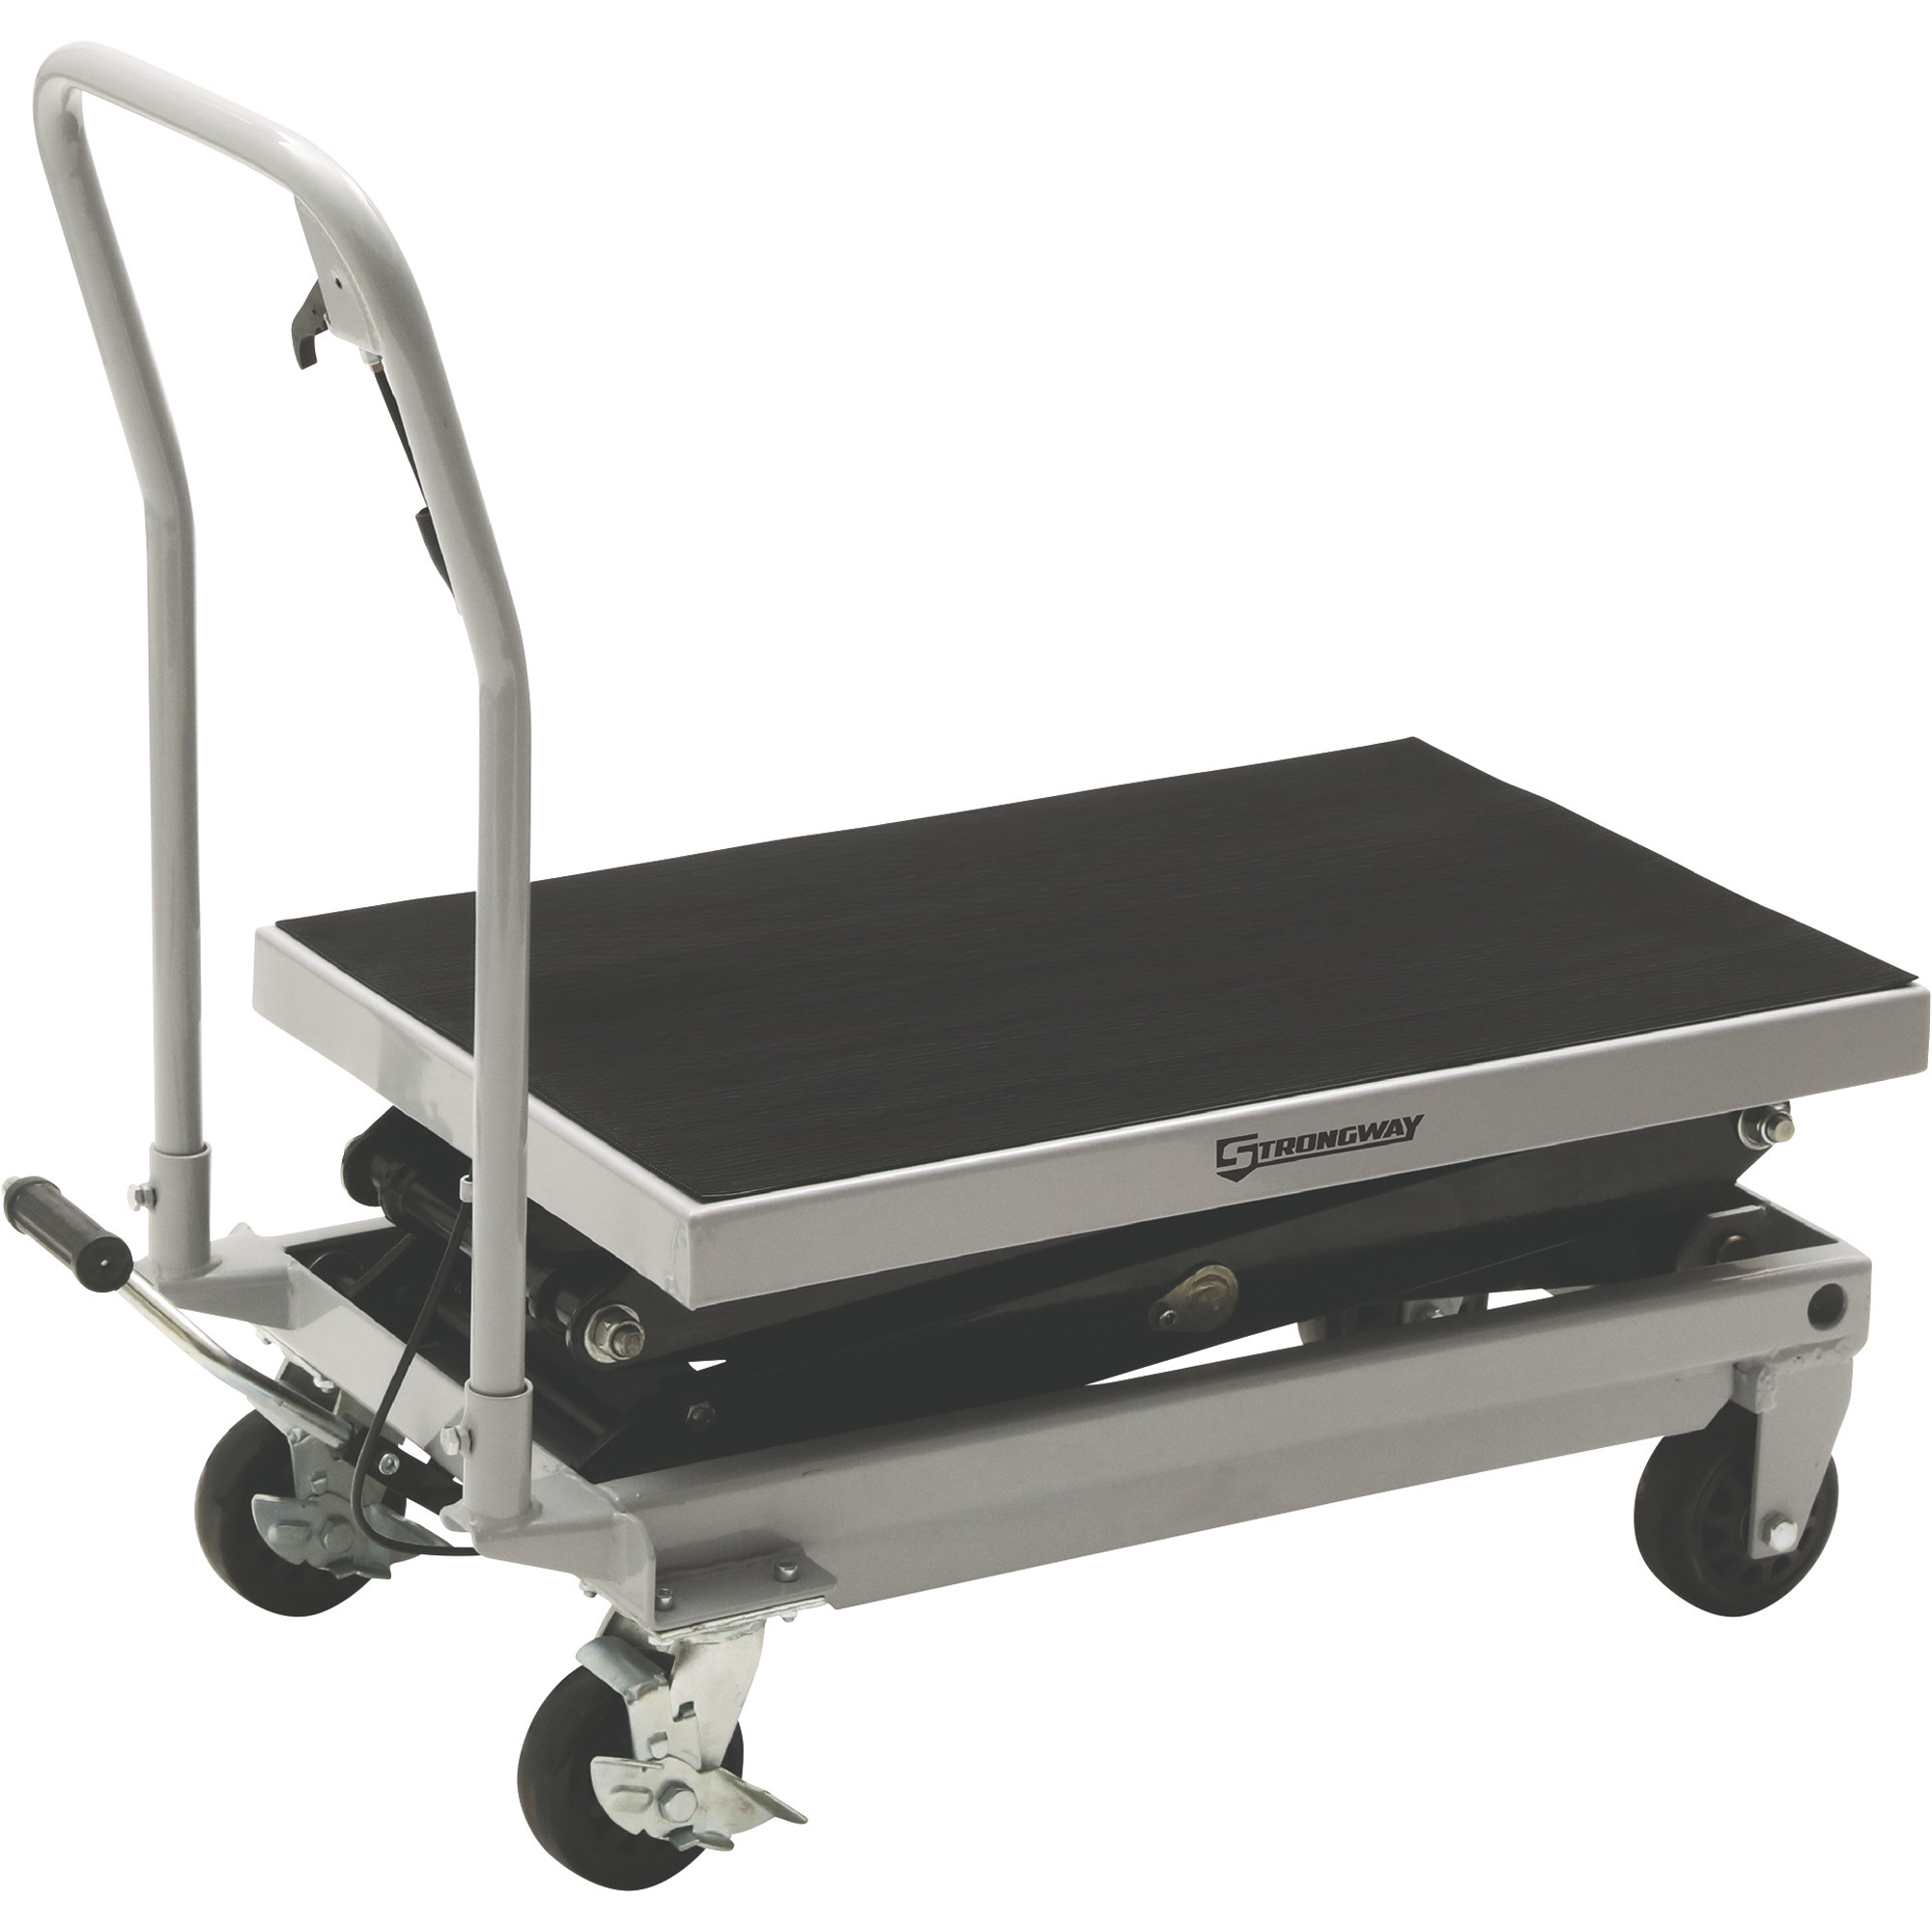 Strongway 2-Speed Hydraulic Rapid Lift XT Table Cart, 1000-Lb. Capacity, 54 1/4Inch Lift